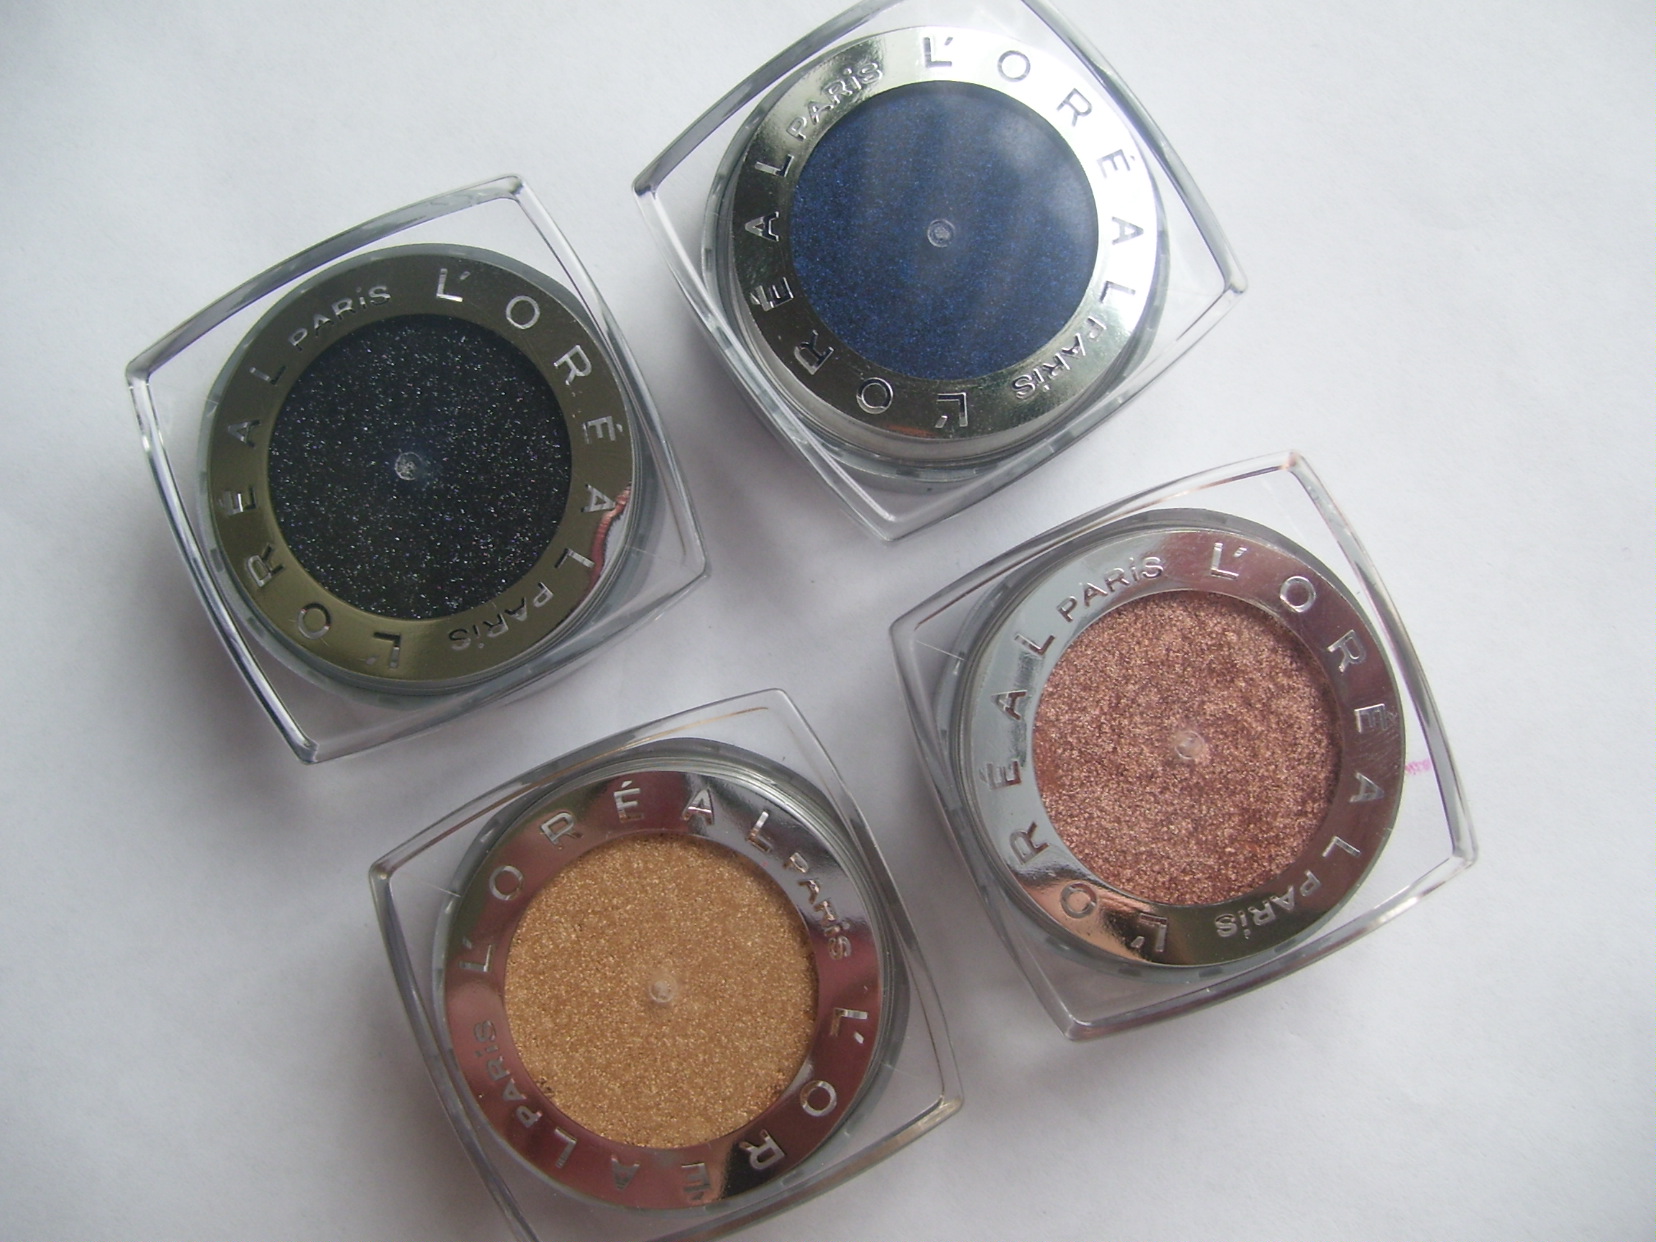 *CLOSED* Giveaway: L’Oreal Paris Infallible Eyeshadows *Open to U.S. and International Readers *